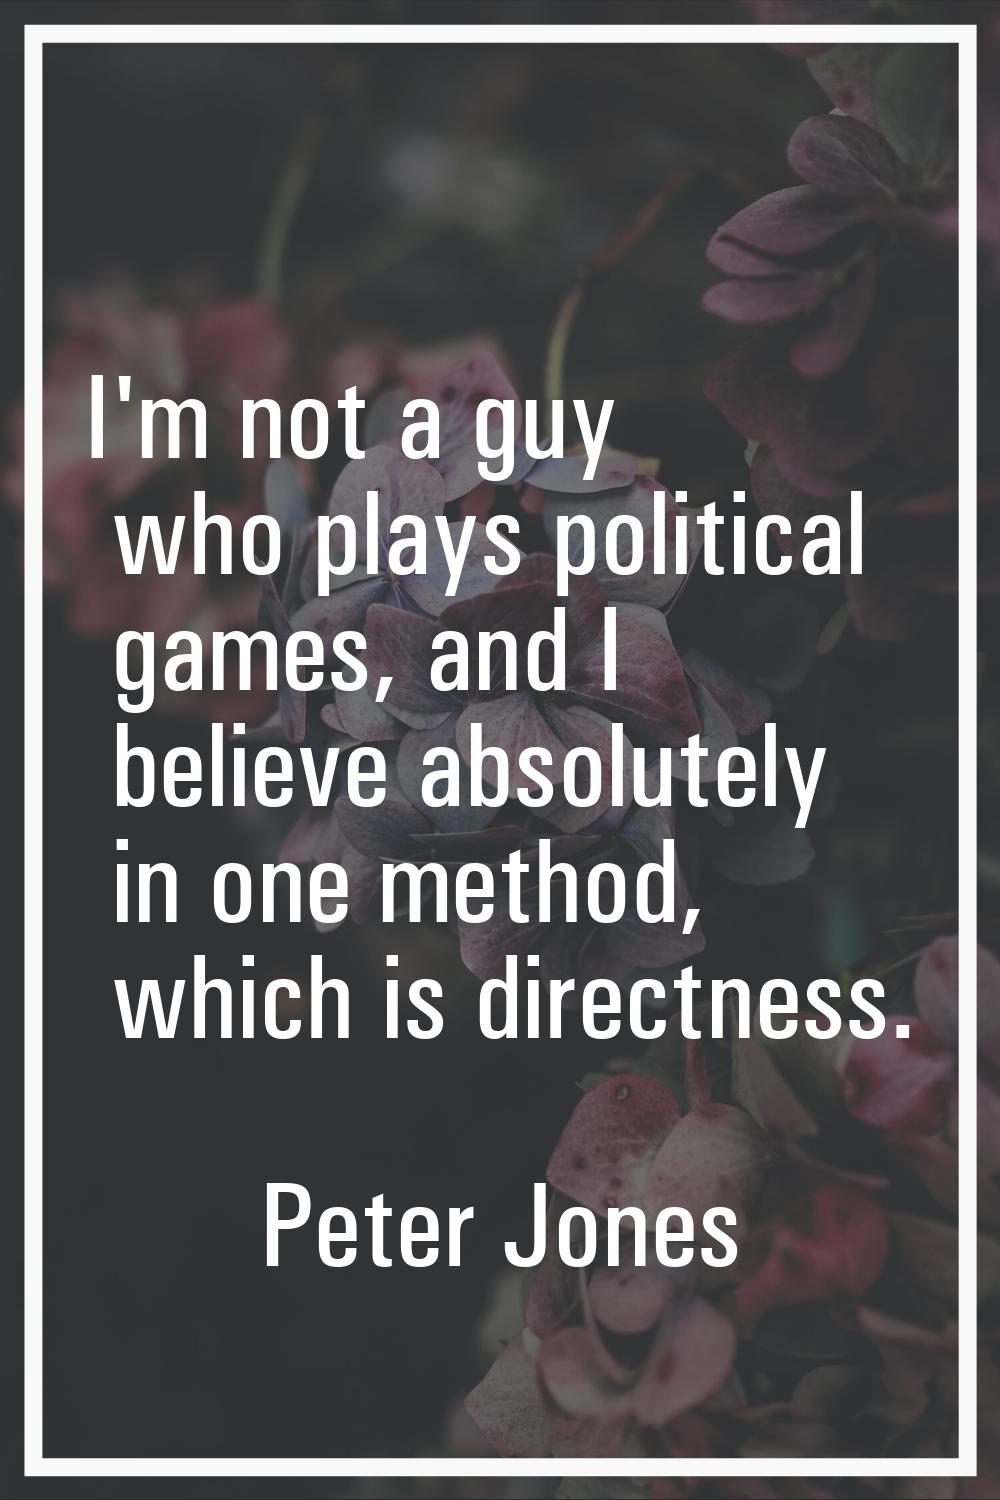 I'm not a guy who plays political games, and I believe absolutely in one method, which is directnes